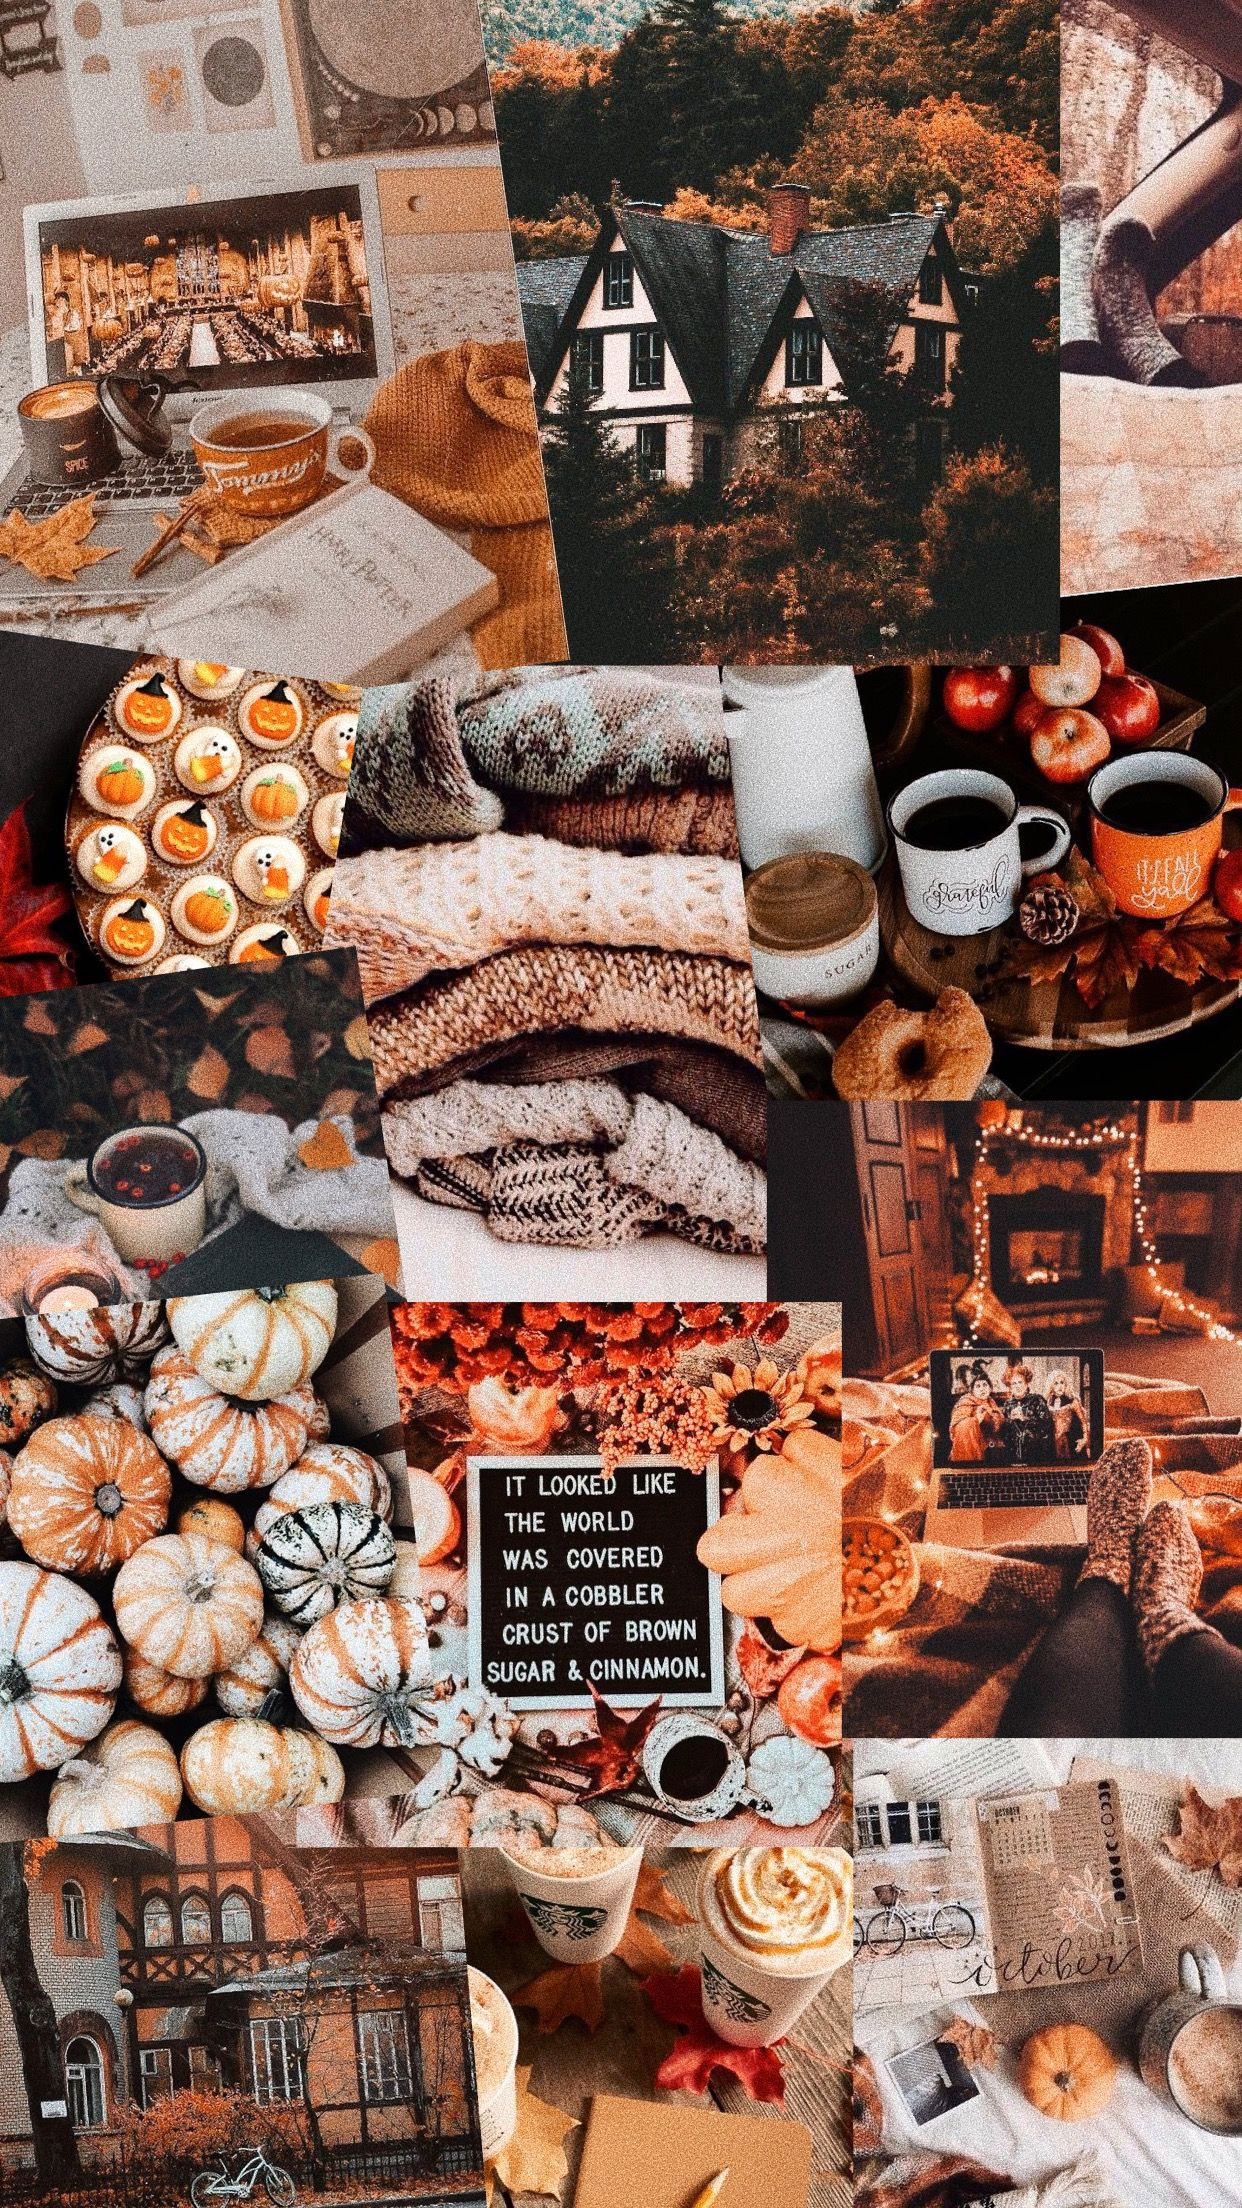 Cute Brown Aesthetic Wallpaper for Phone, Pretty Autumn Collage Aesthetic I Take You. Wedding Readings. Wedding Ideas